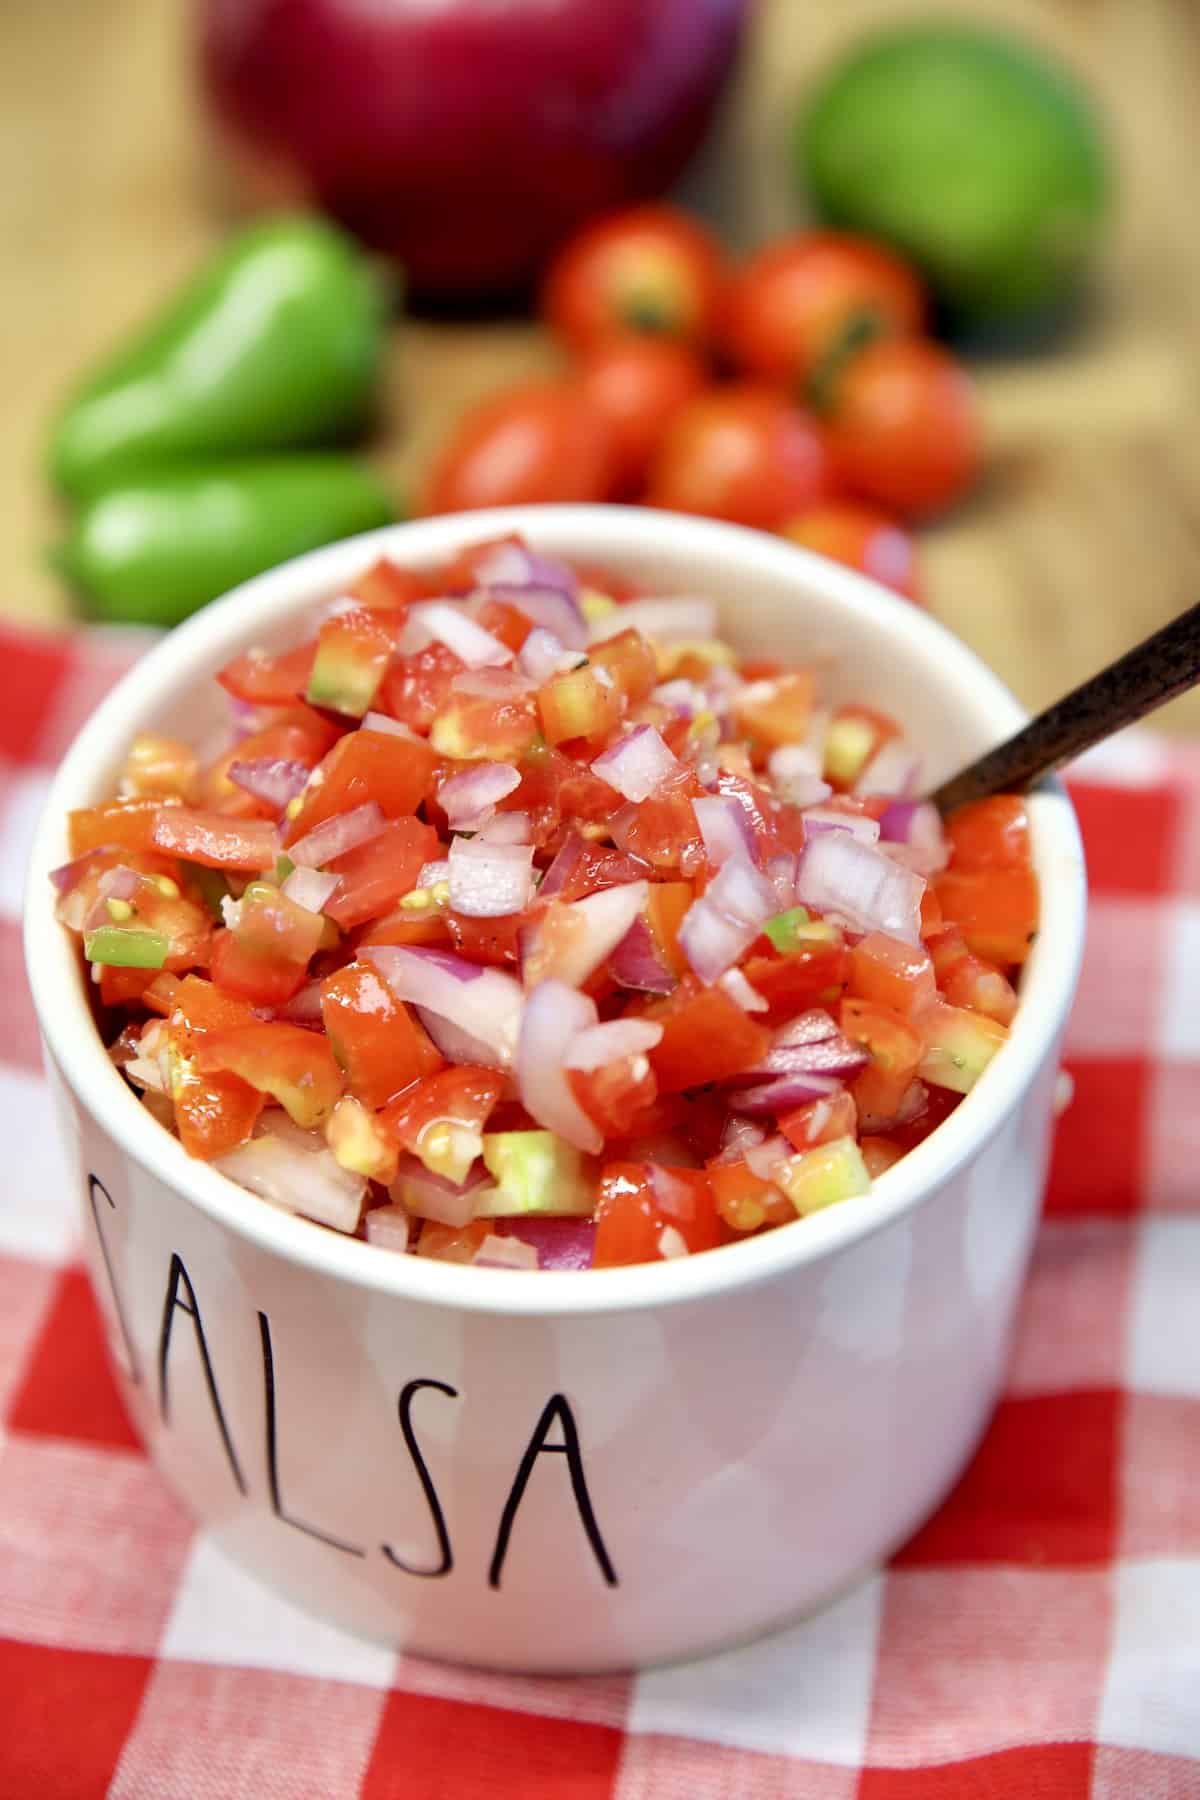 Bowl of salsa with a spoon.